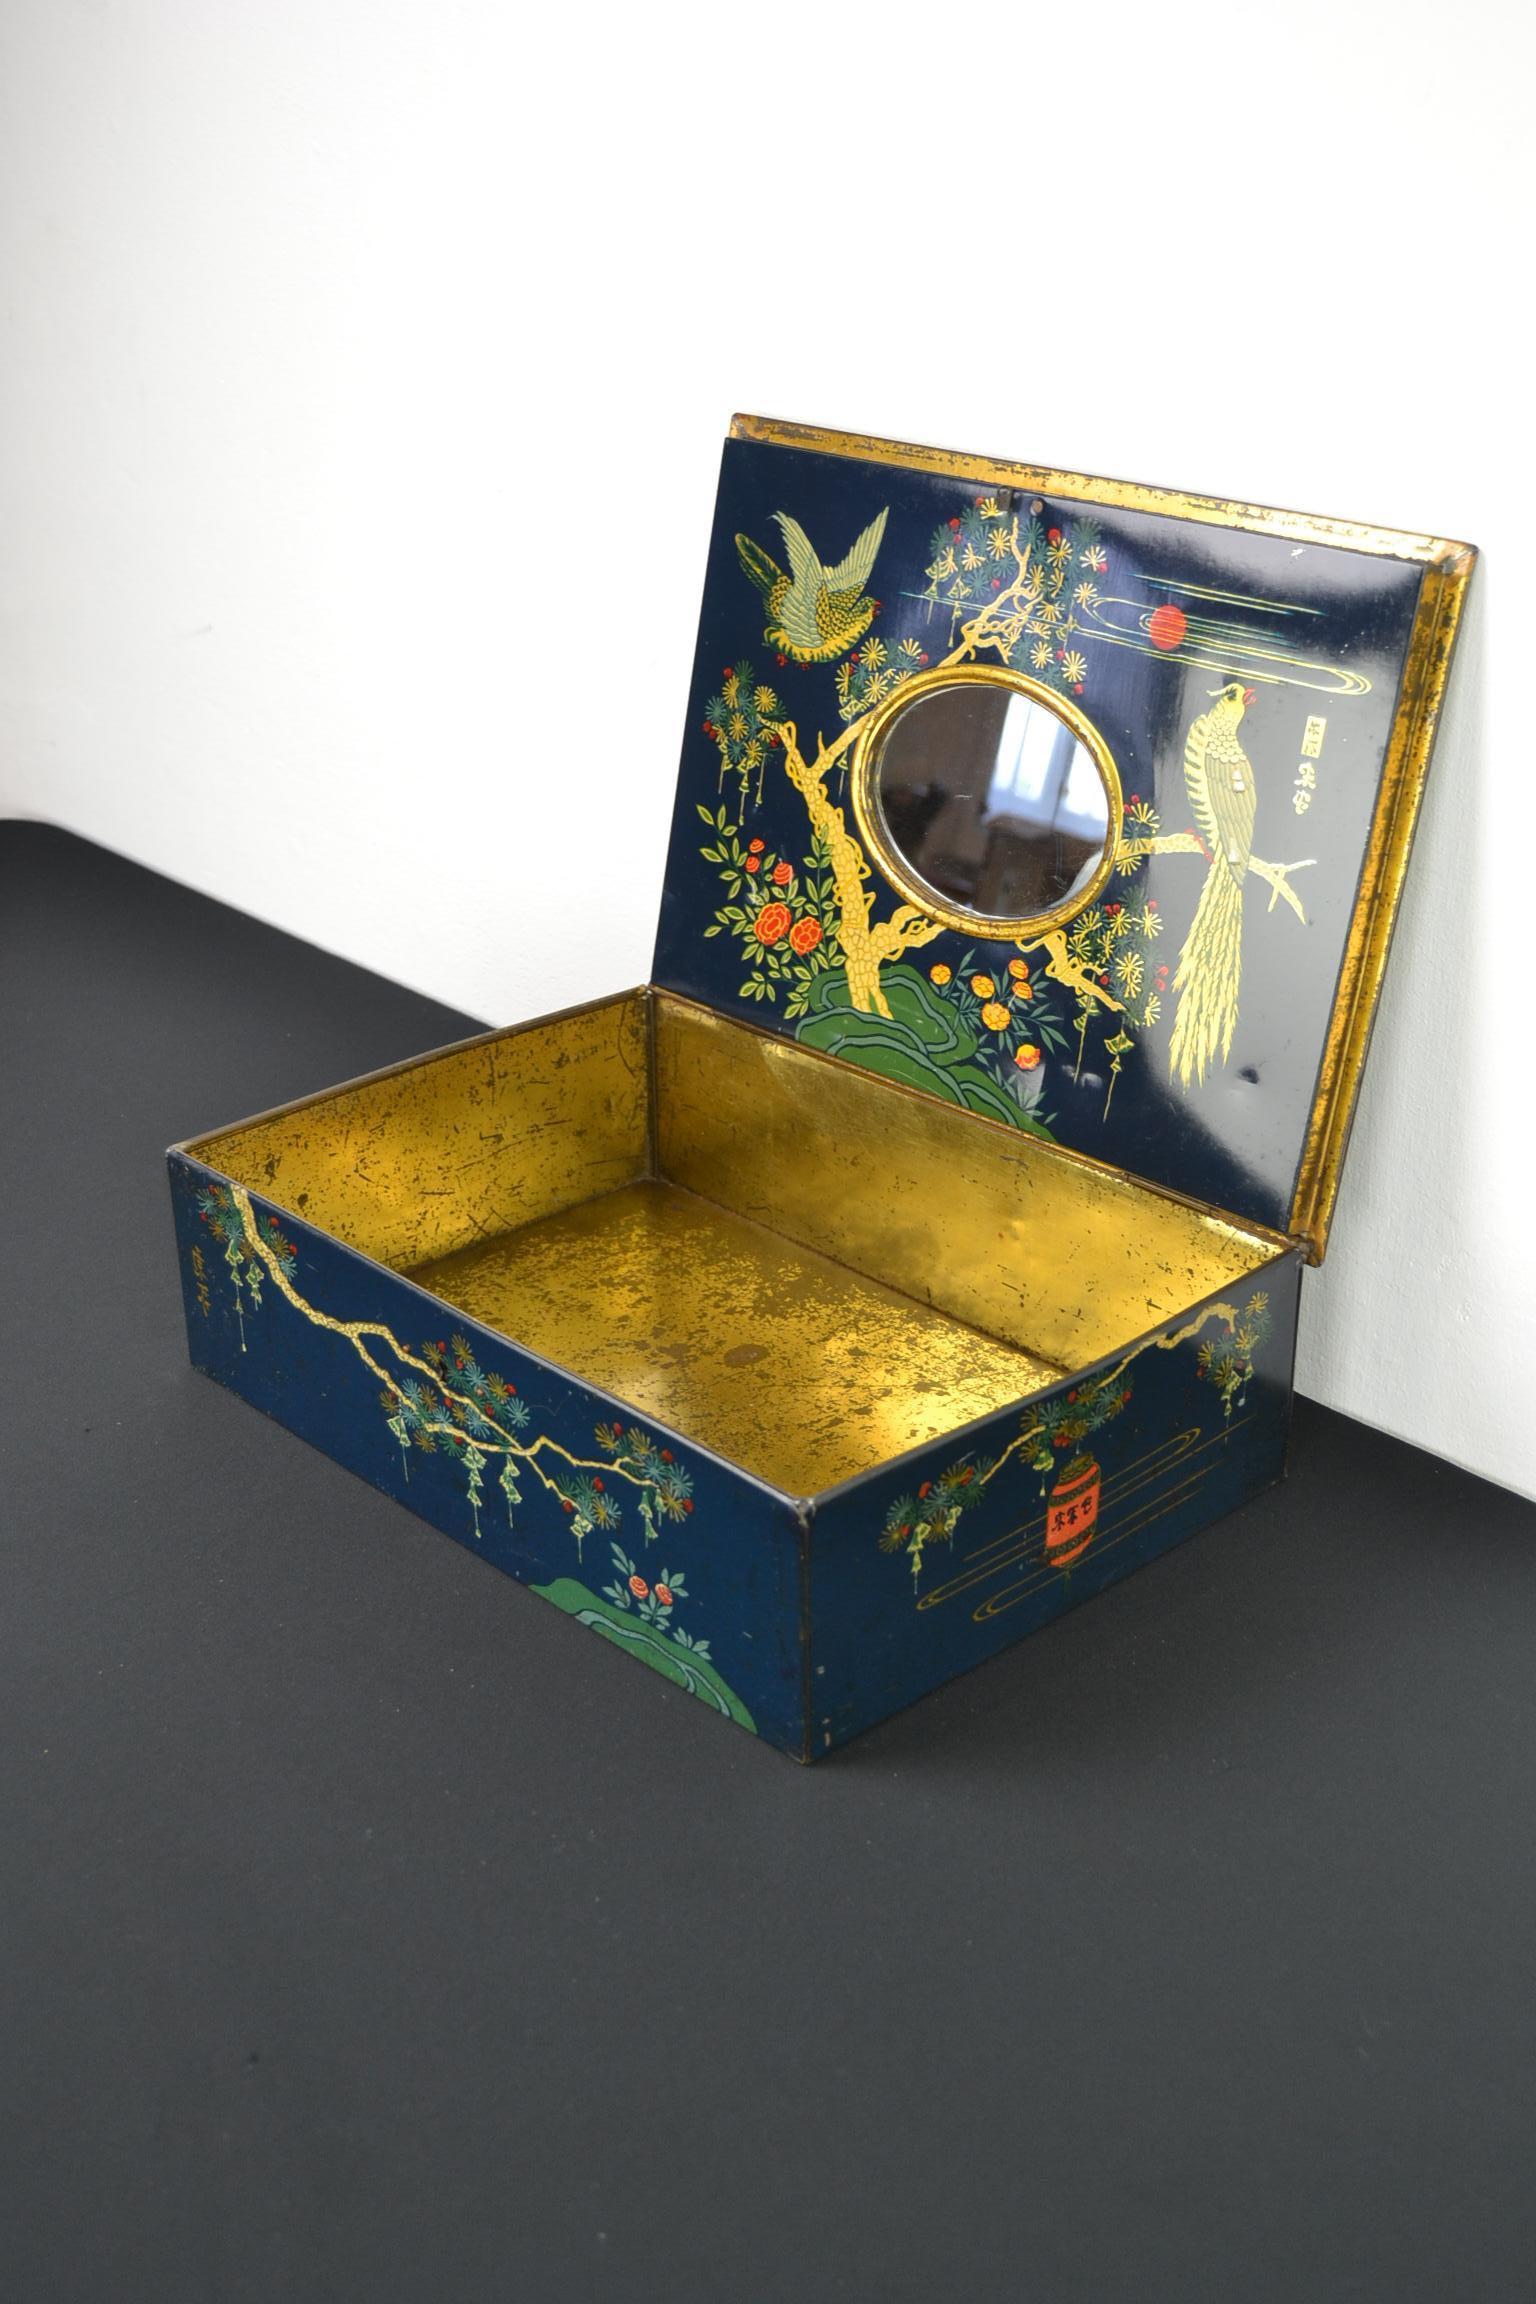 Large antique tin with mirror inside and lots of birds.
This lithographic tin box with mirror inside dates from the early 20th century.
It's a stylish and elegant antique metal storage tin
in dark blue color with a beautiful design in Asian